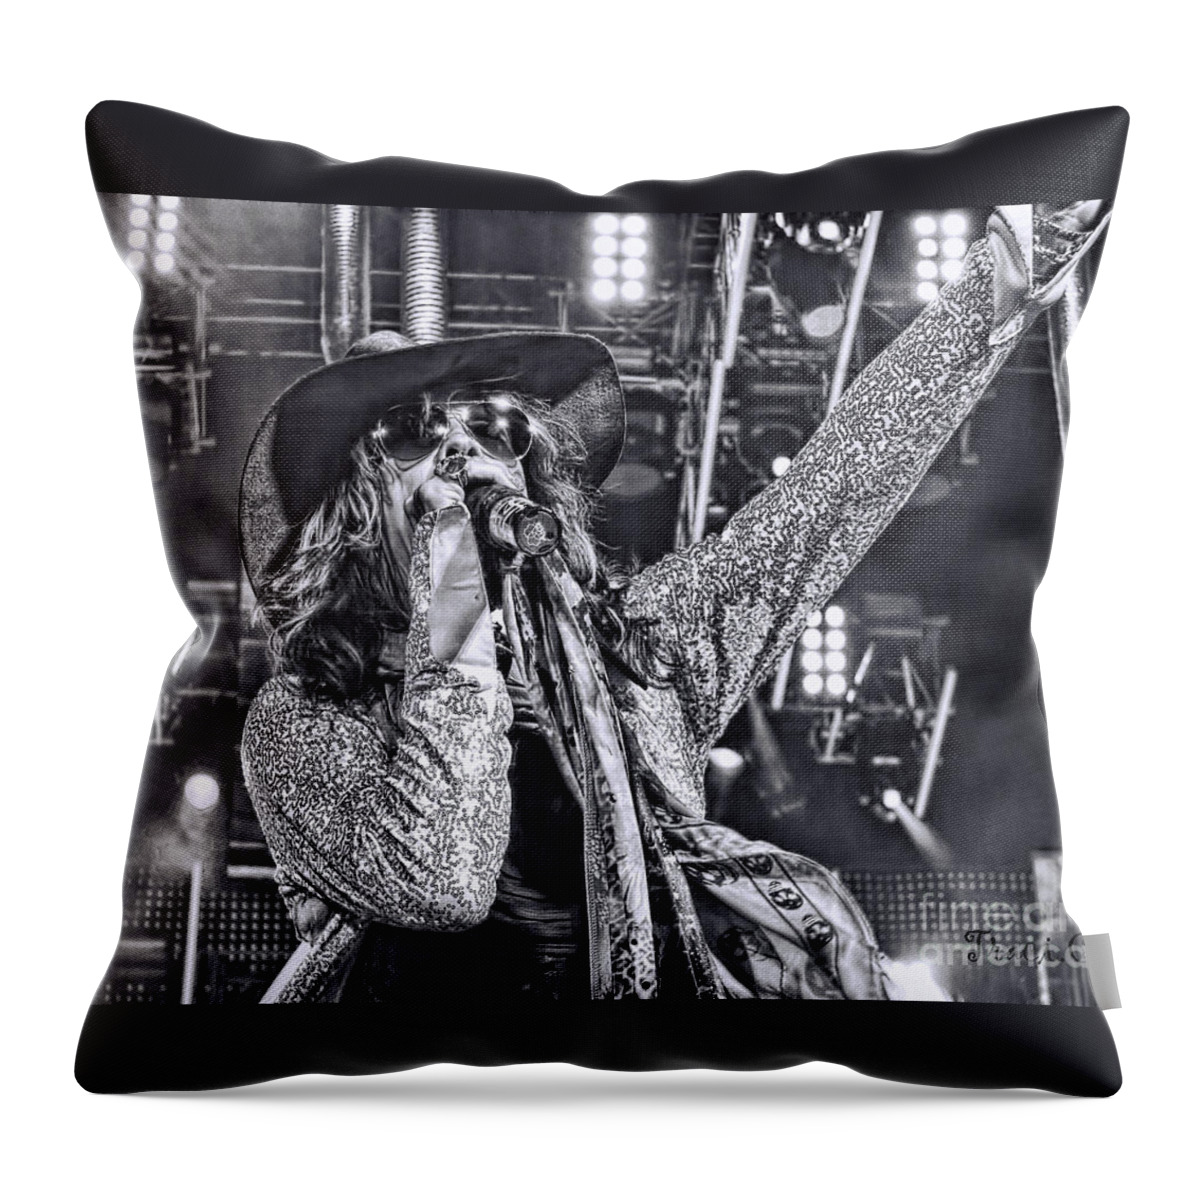 Joe Perry Throw Pillow featuring the photograph Steven T by Traci Cottingham